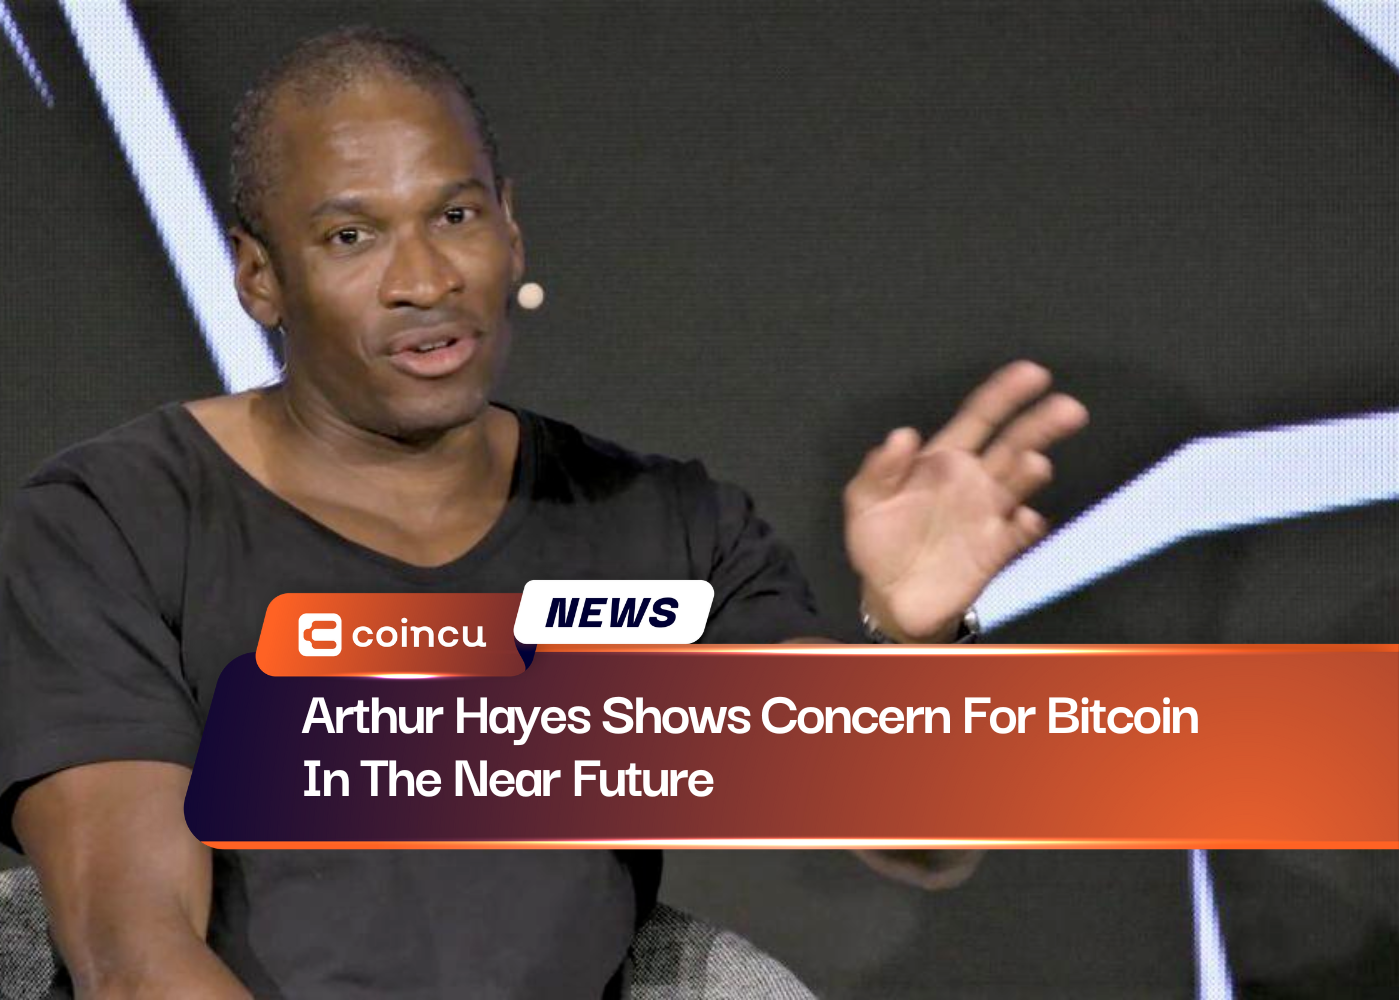 Arthur Hayes Shows Concern For Bitcoin In The Near Future